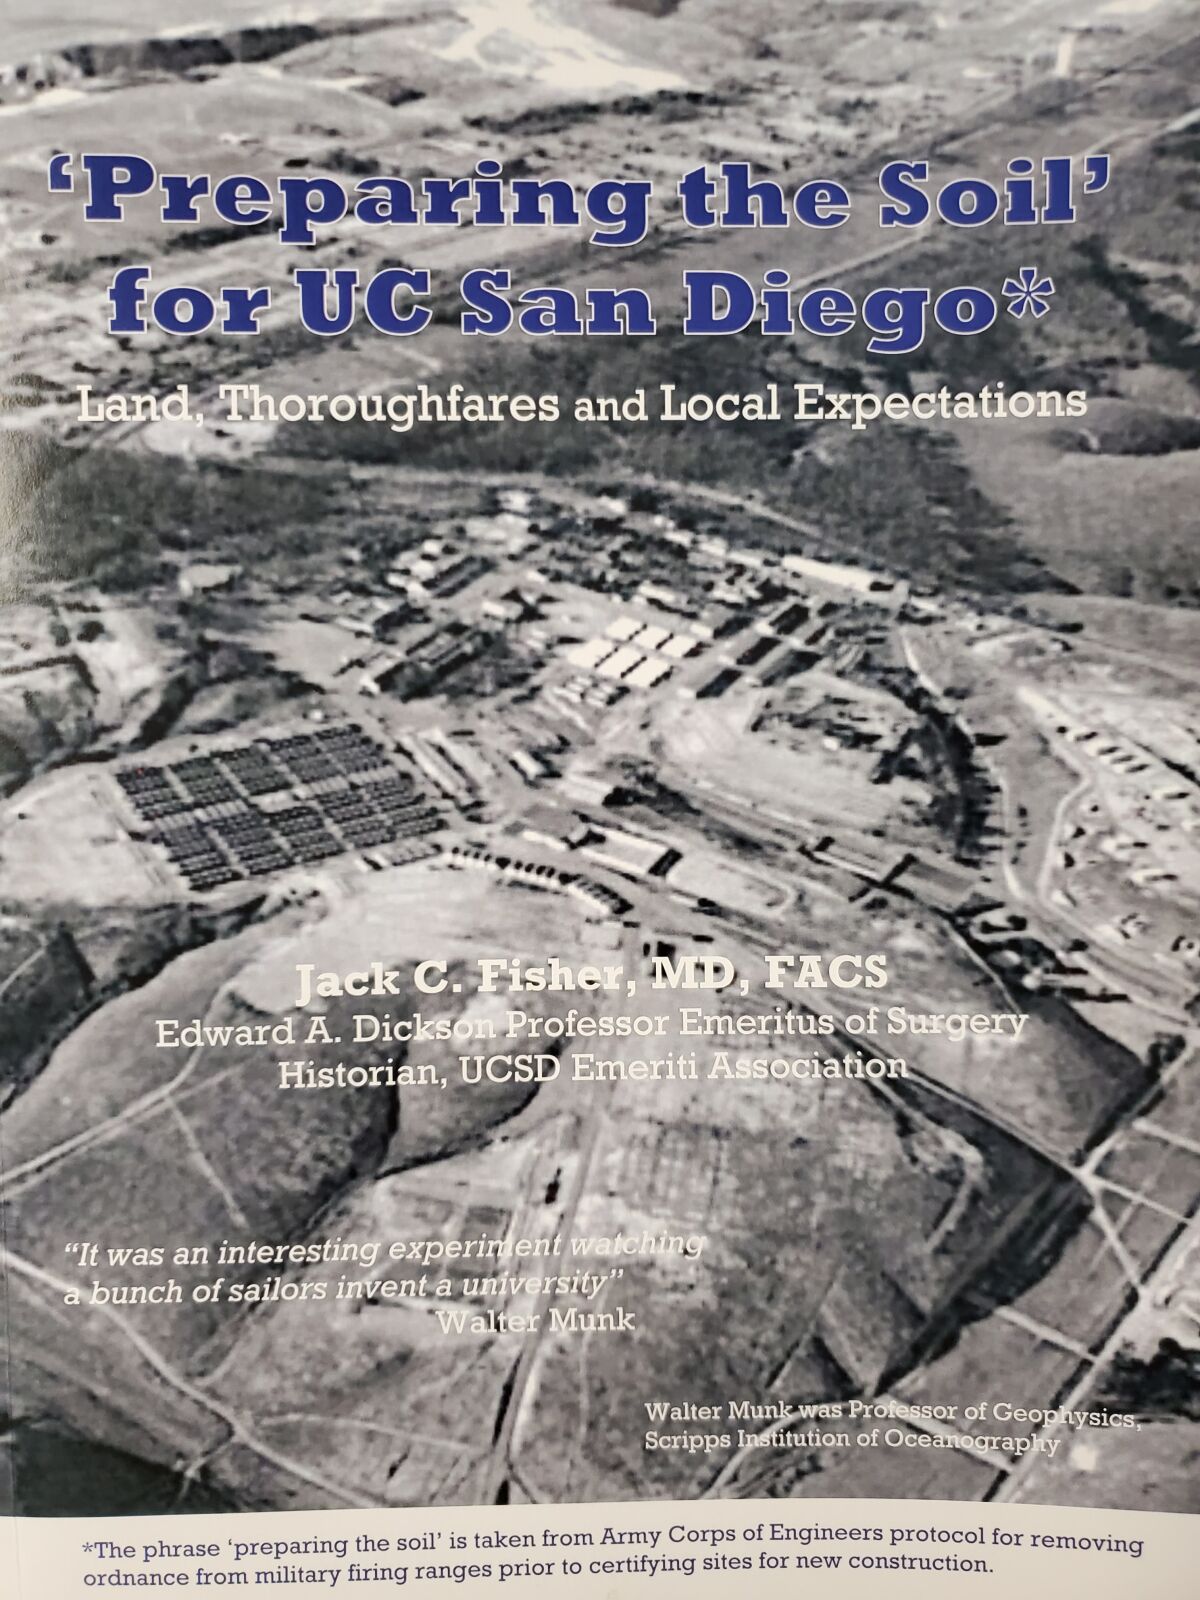 "Preparing the Soil for UC San Diego" by La Jolla Shores resident Jack Fisher